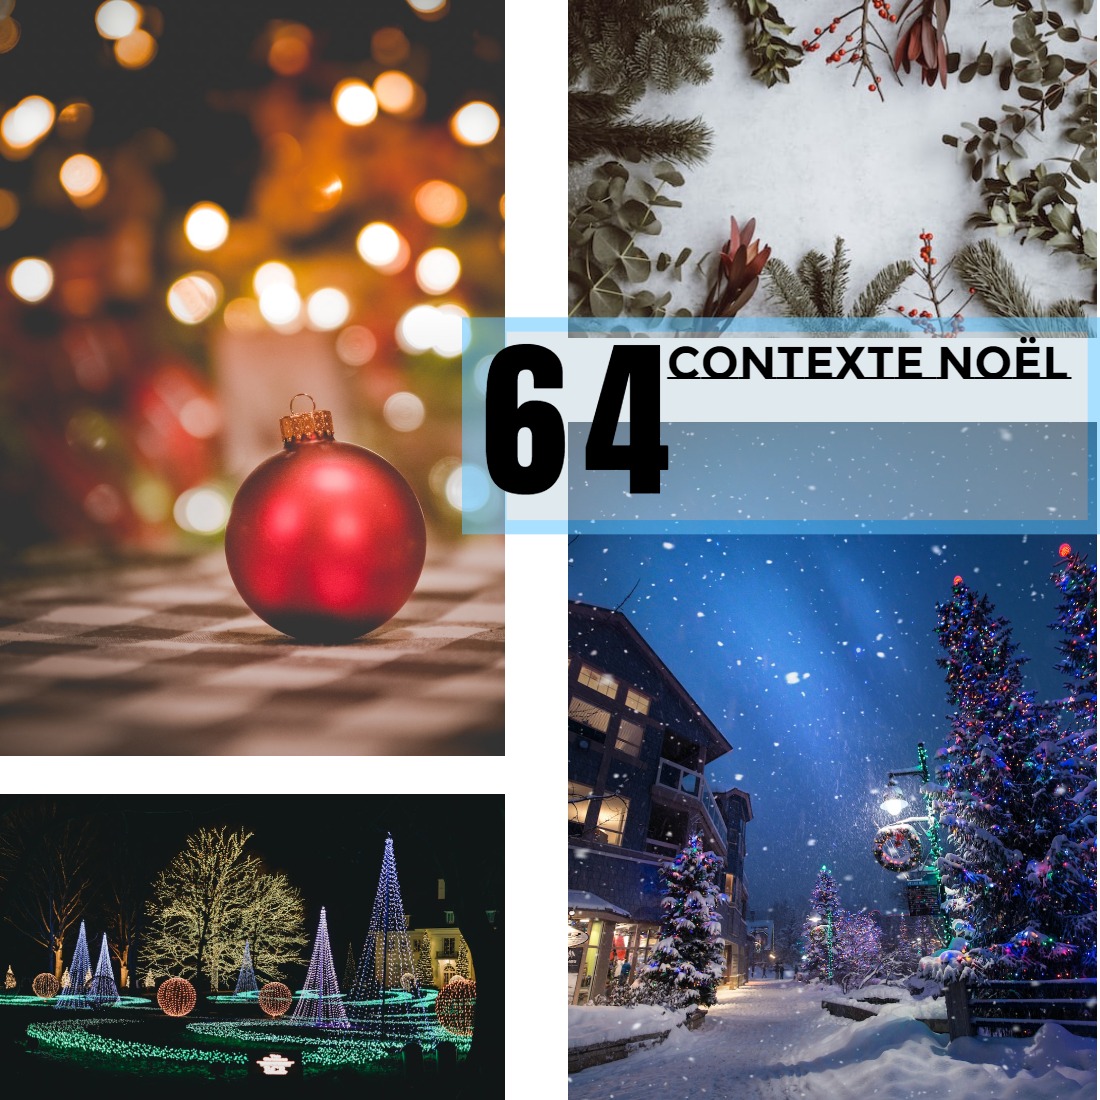 This bundle contains 64 festive JPG images of Christmas backgrounds that are sure to enchant you during the holiday season preview image.